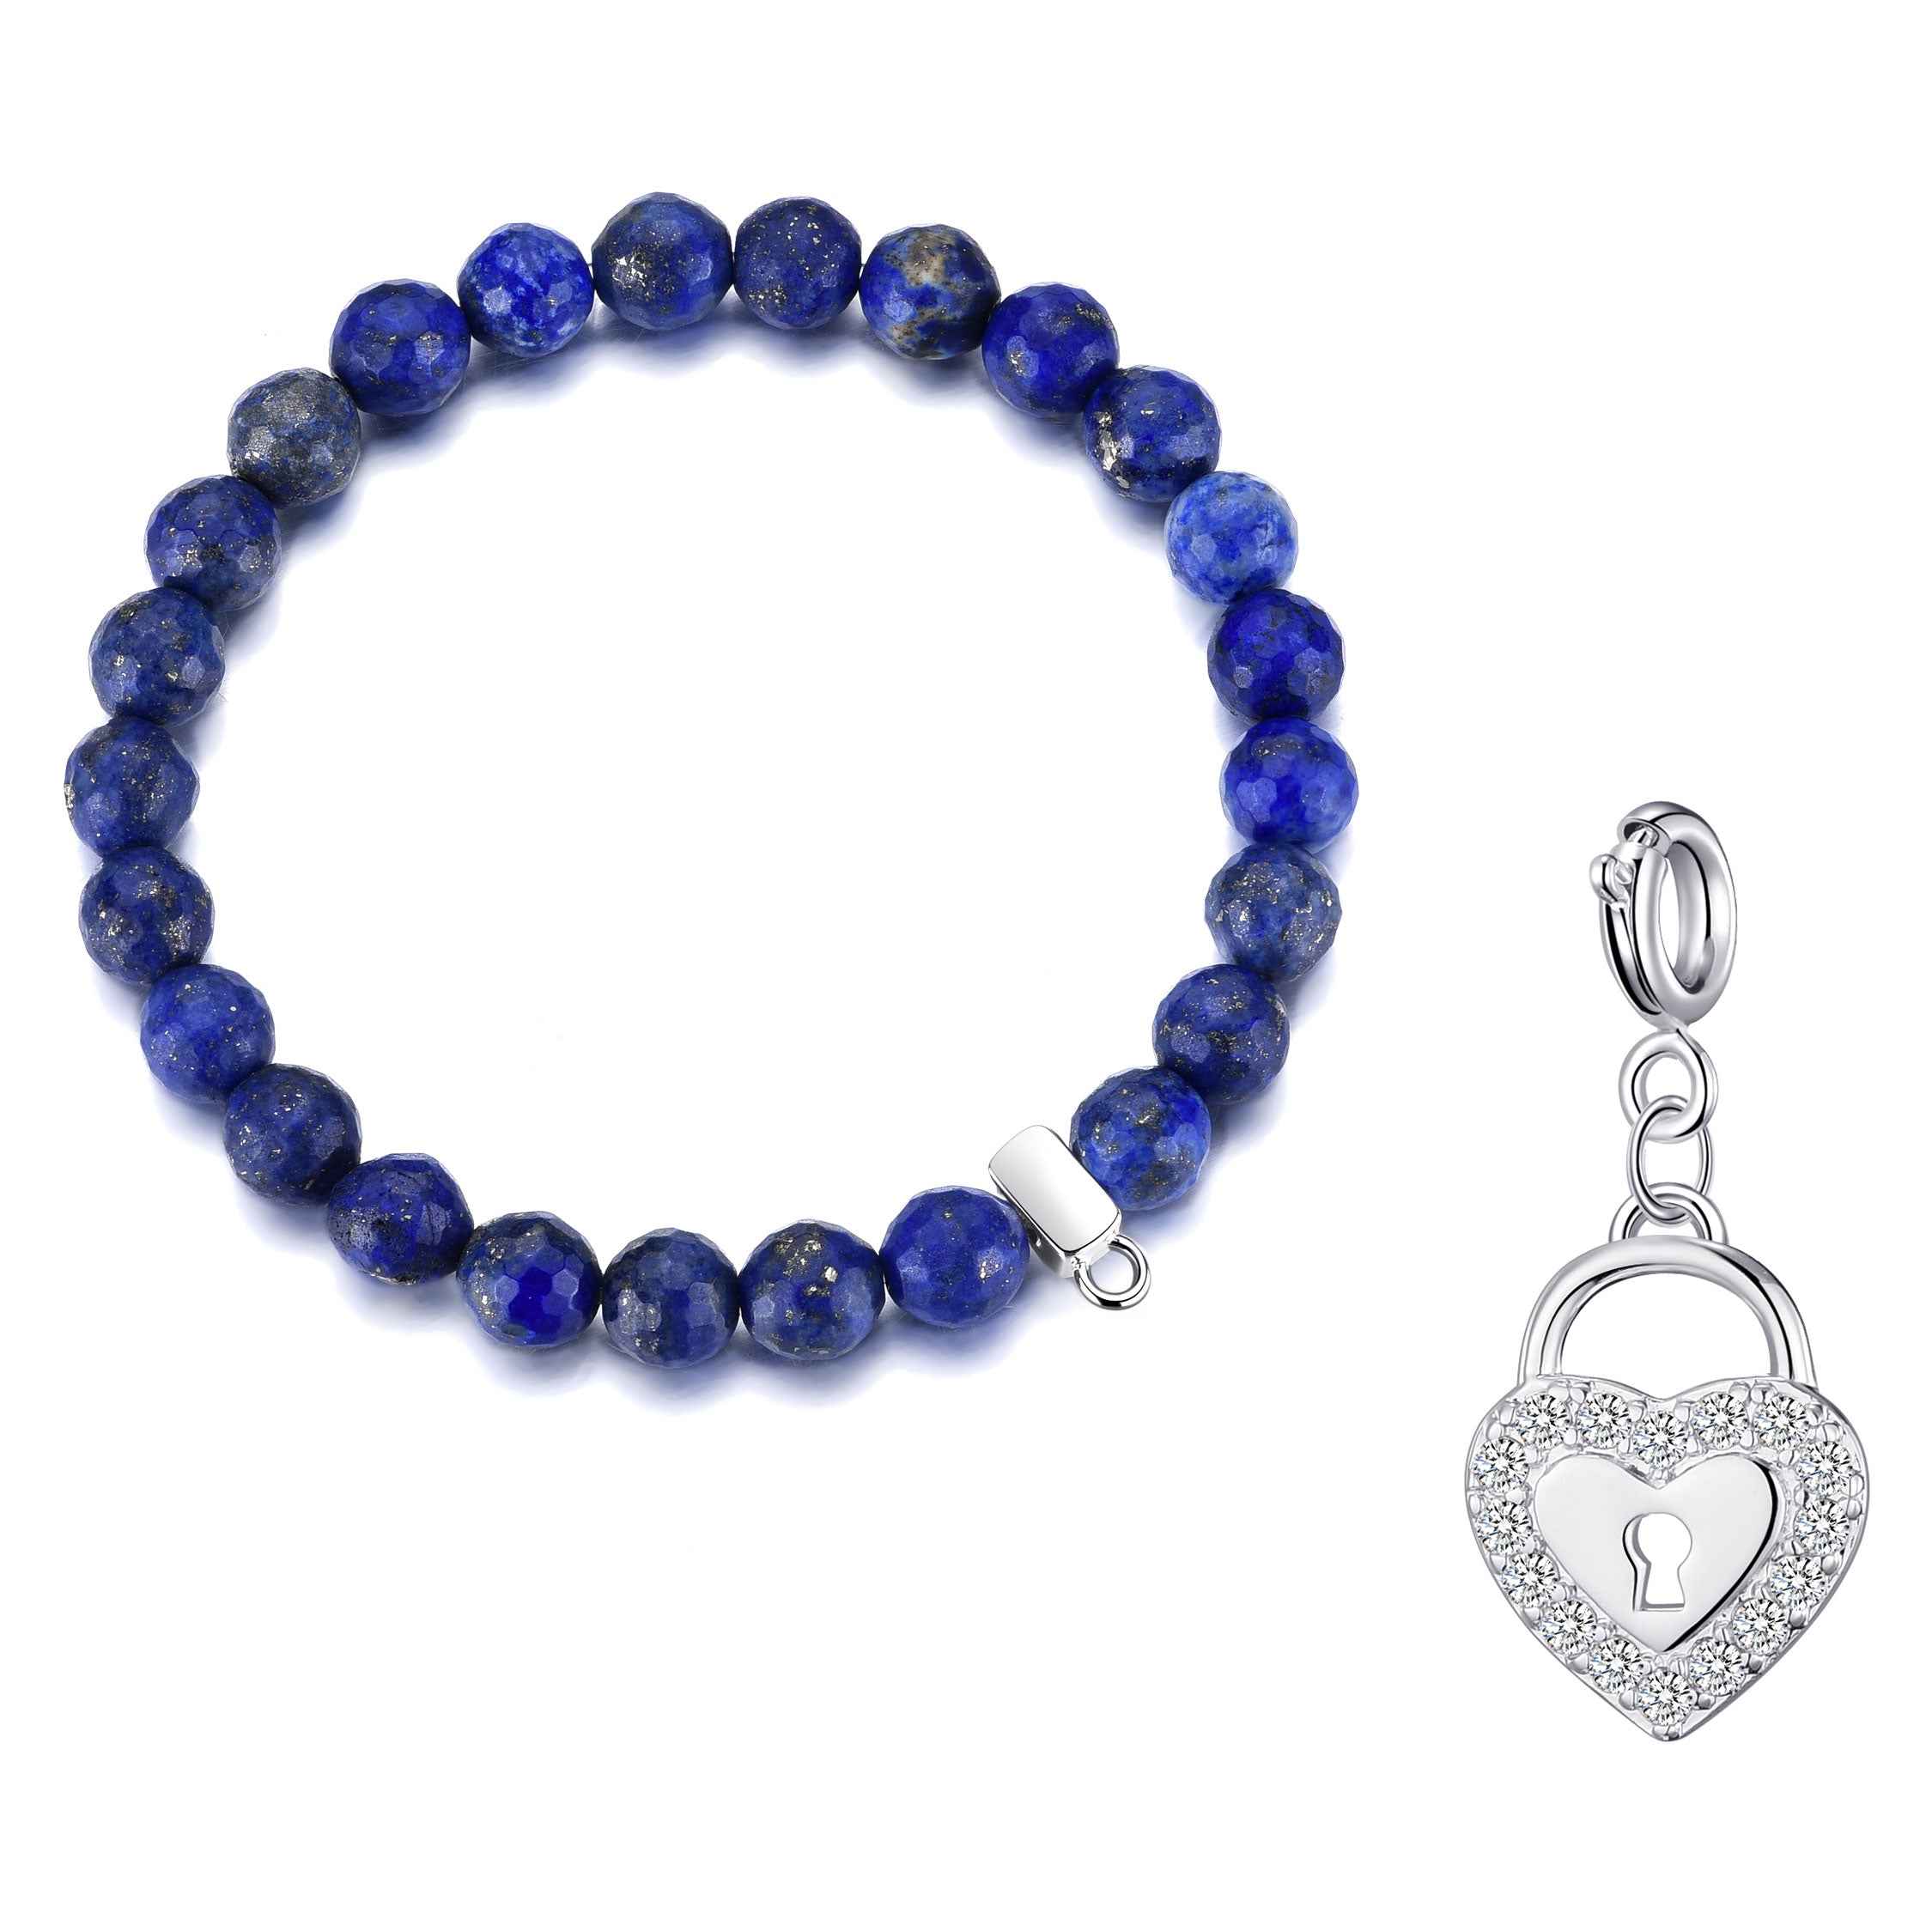 Faceted Lapis Gemstone Bracelet with Charm Created with Zircondia® Crystals